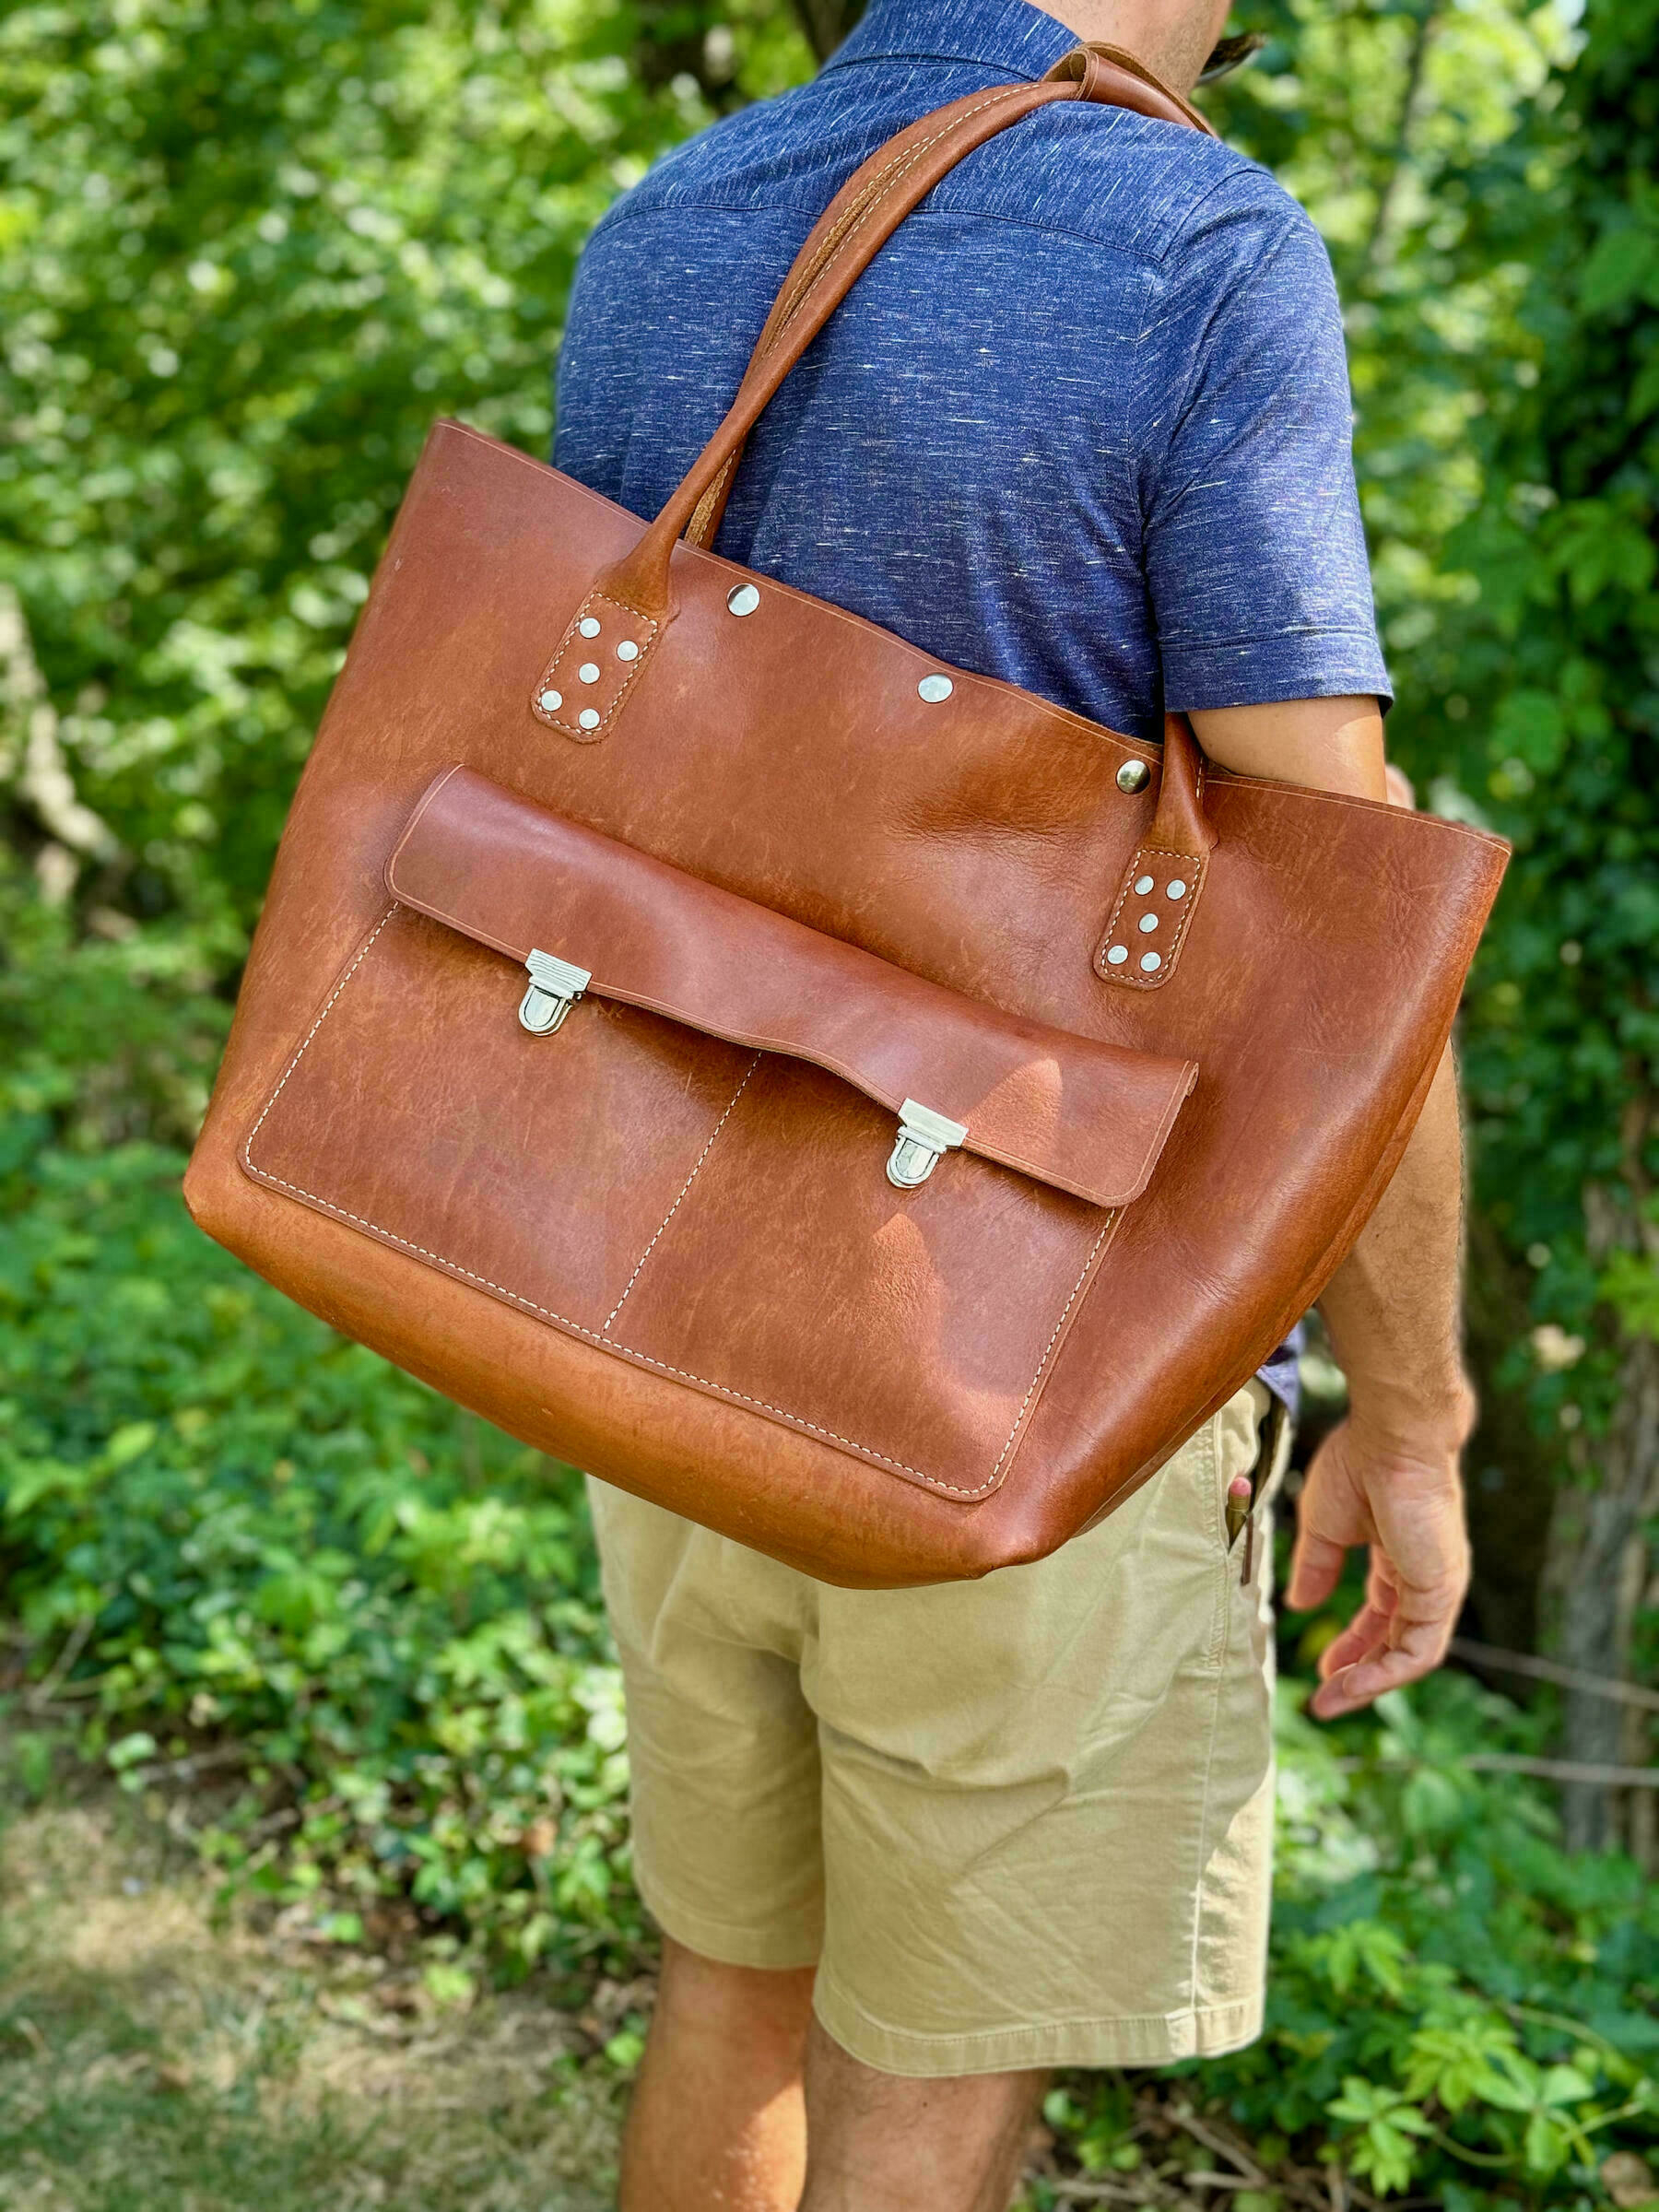 A person is carrying a large brown leather bag over their shoulder while standing outdoors by some greenery.